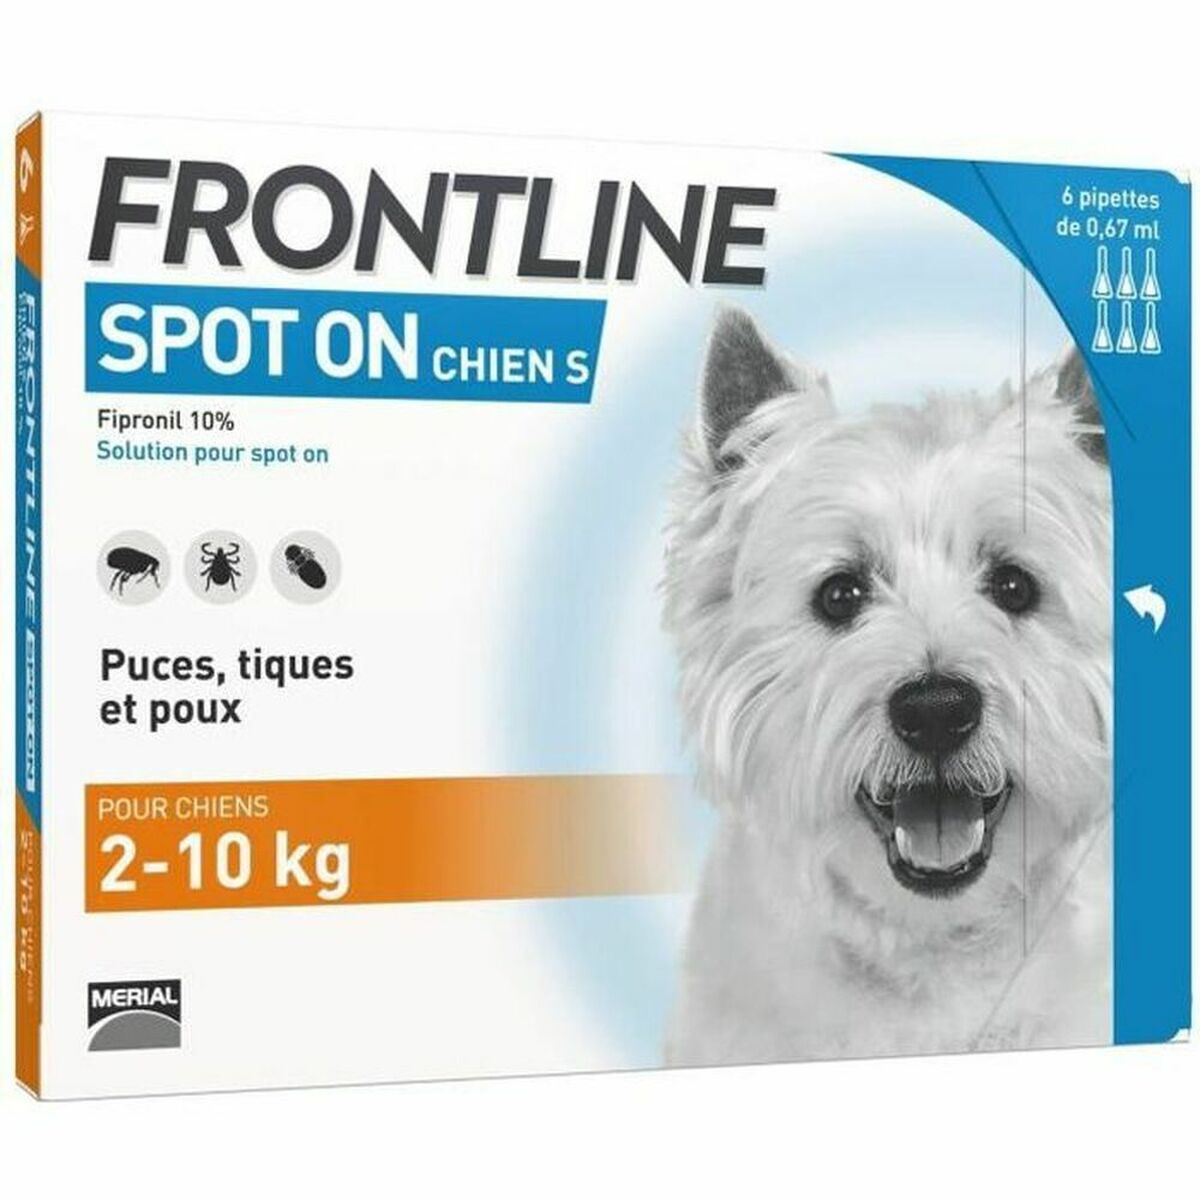 Pipette for Dogs Frontline Spot On 2-10 Kg 6 Units